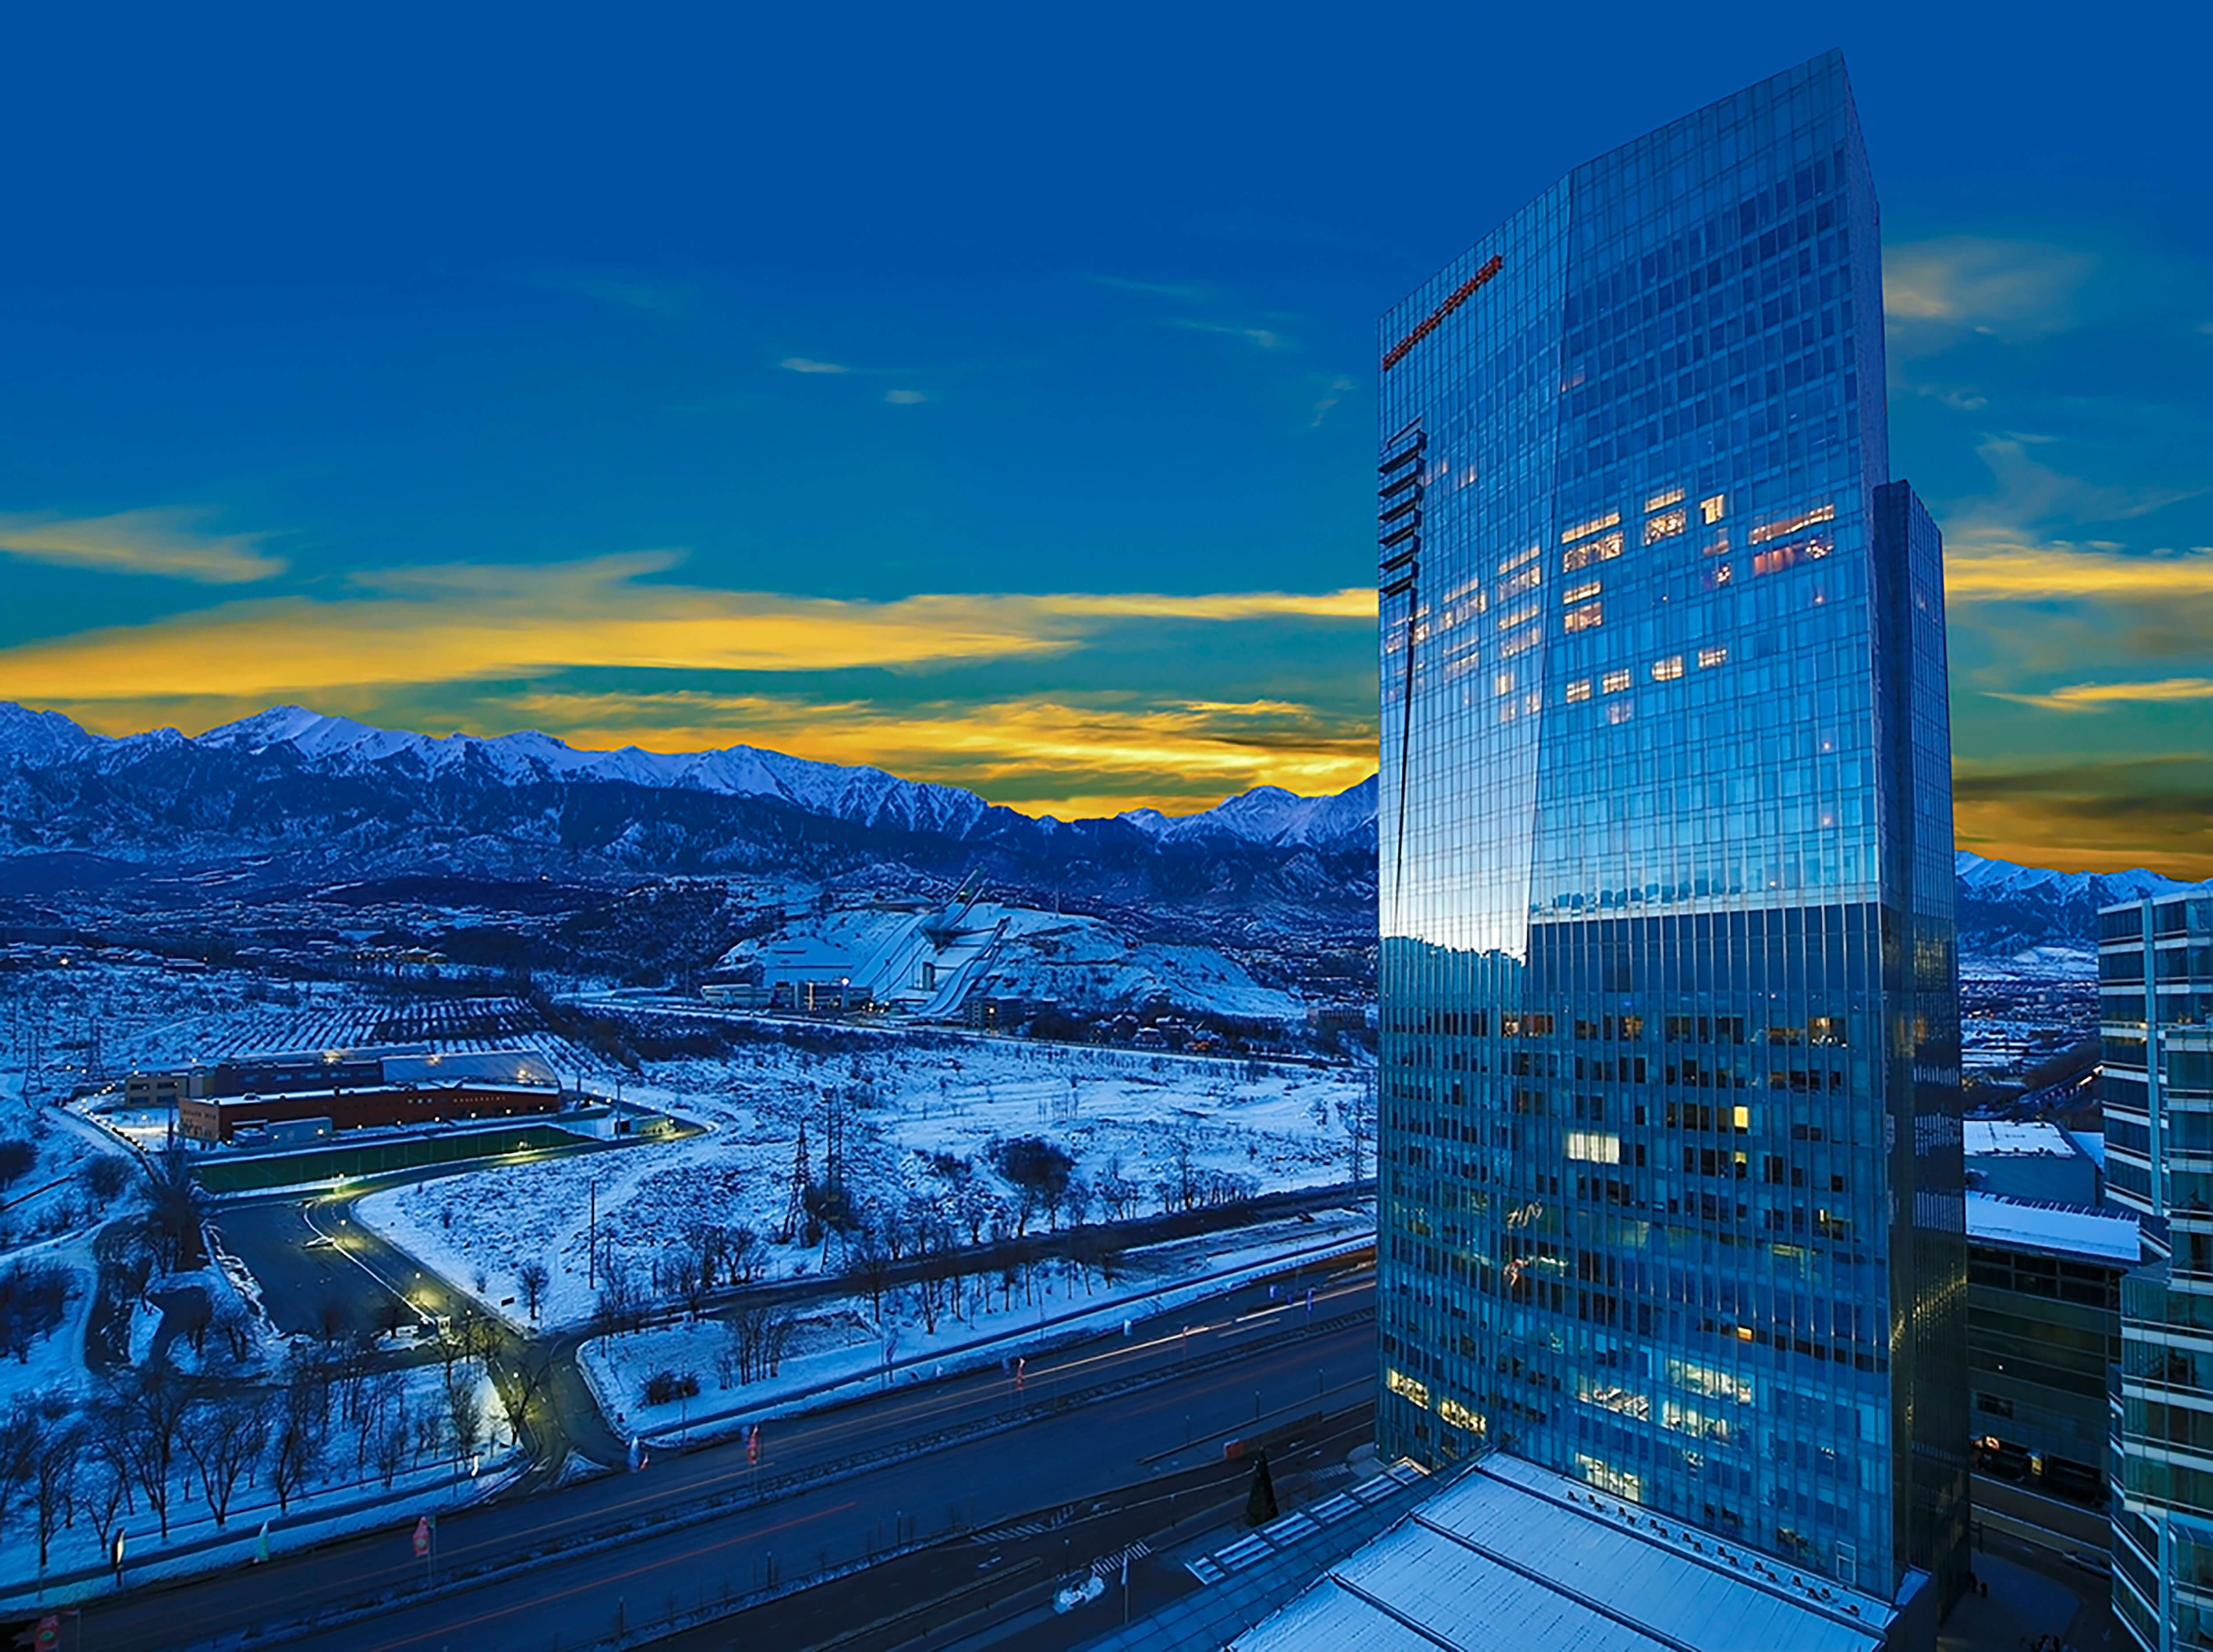 Luxury hotel Ritz Carlton Almaty against sunset and snow backdrop